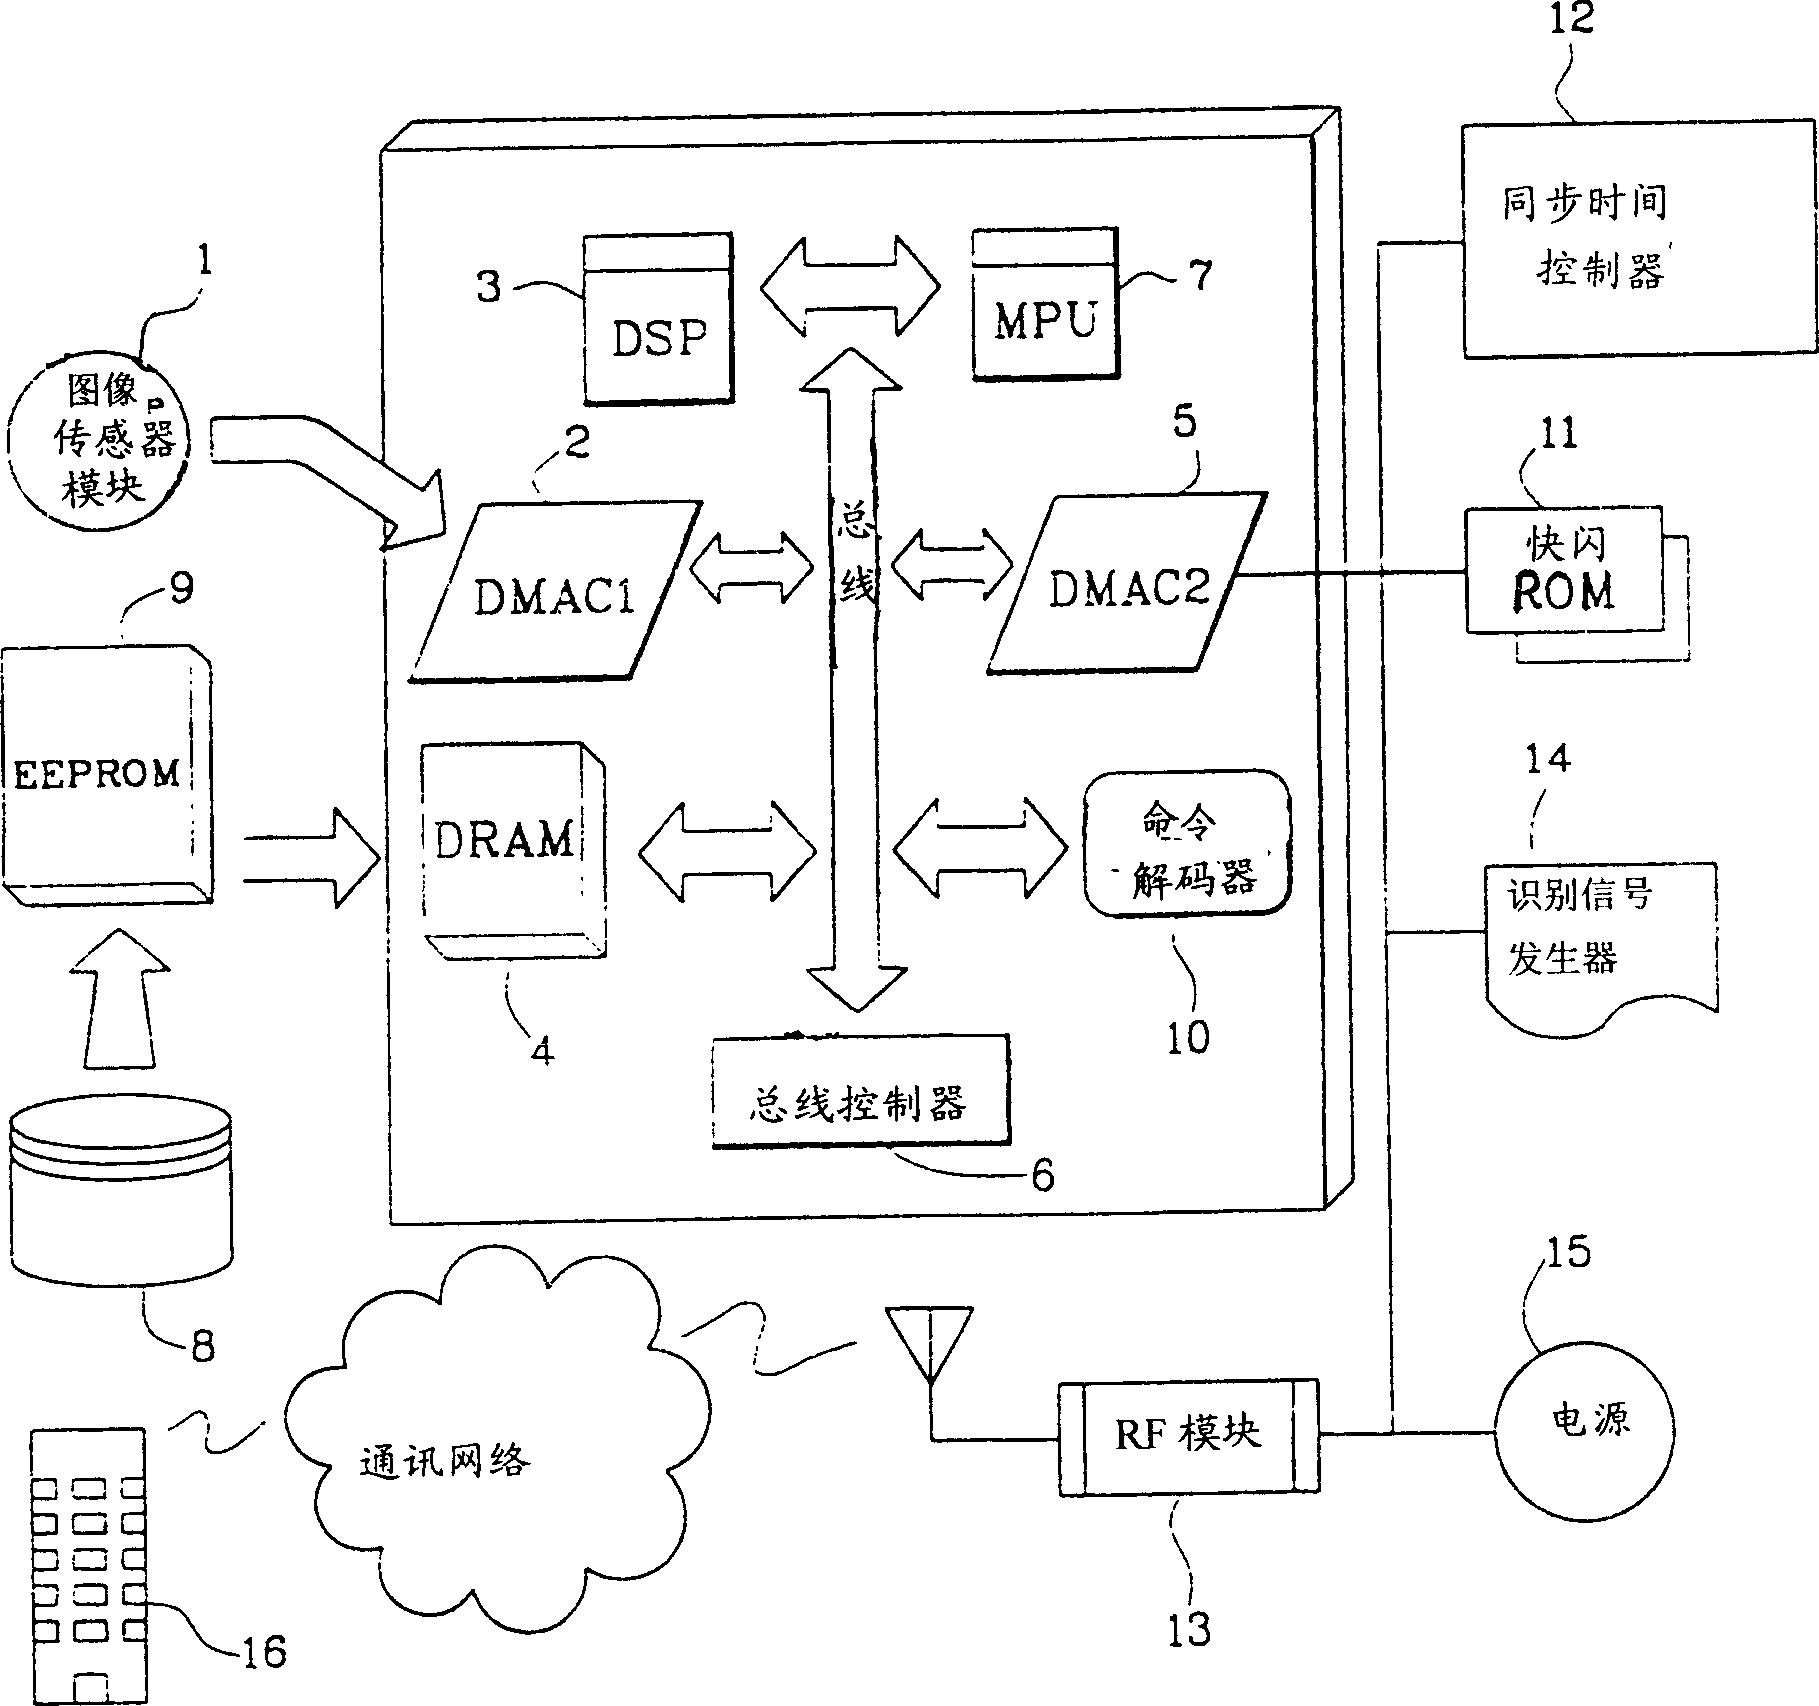 System and method for wireless automatic meter reading